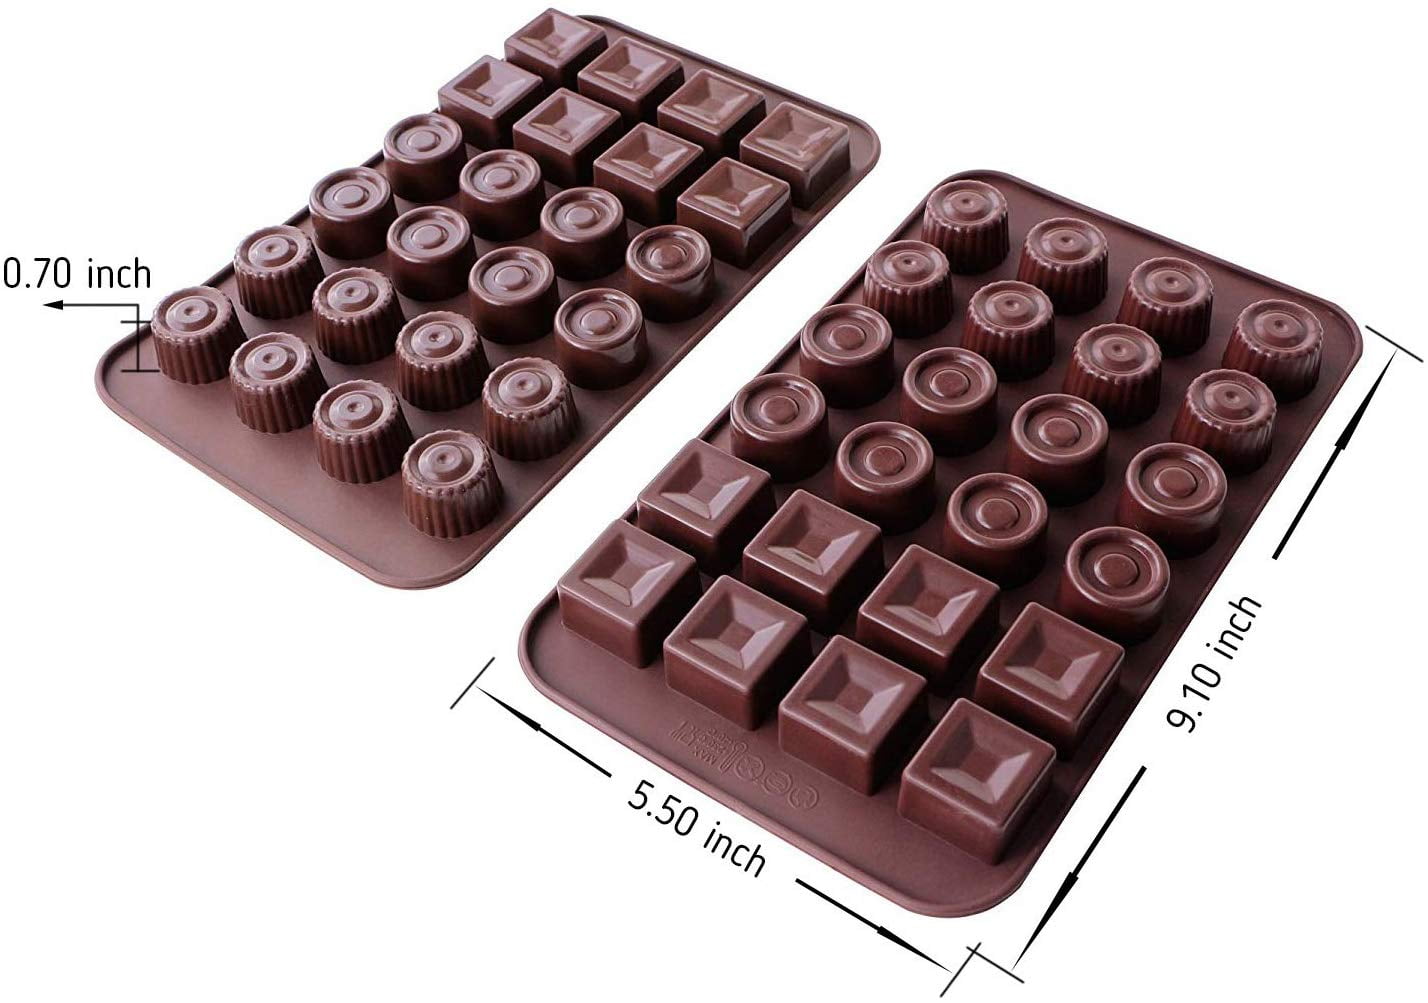 12-Cavity Square Caramel Candy Silicone Molds,Chocolate Truffles Mold For  Fat Bombs Keto Snacks,Christmas Candy - AliExpress